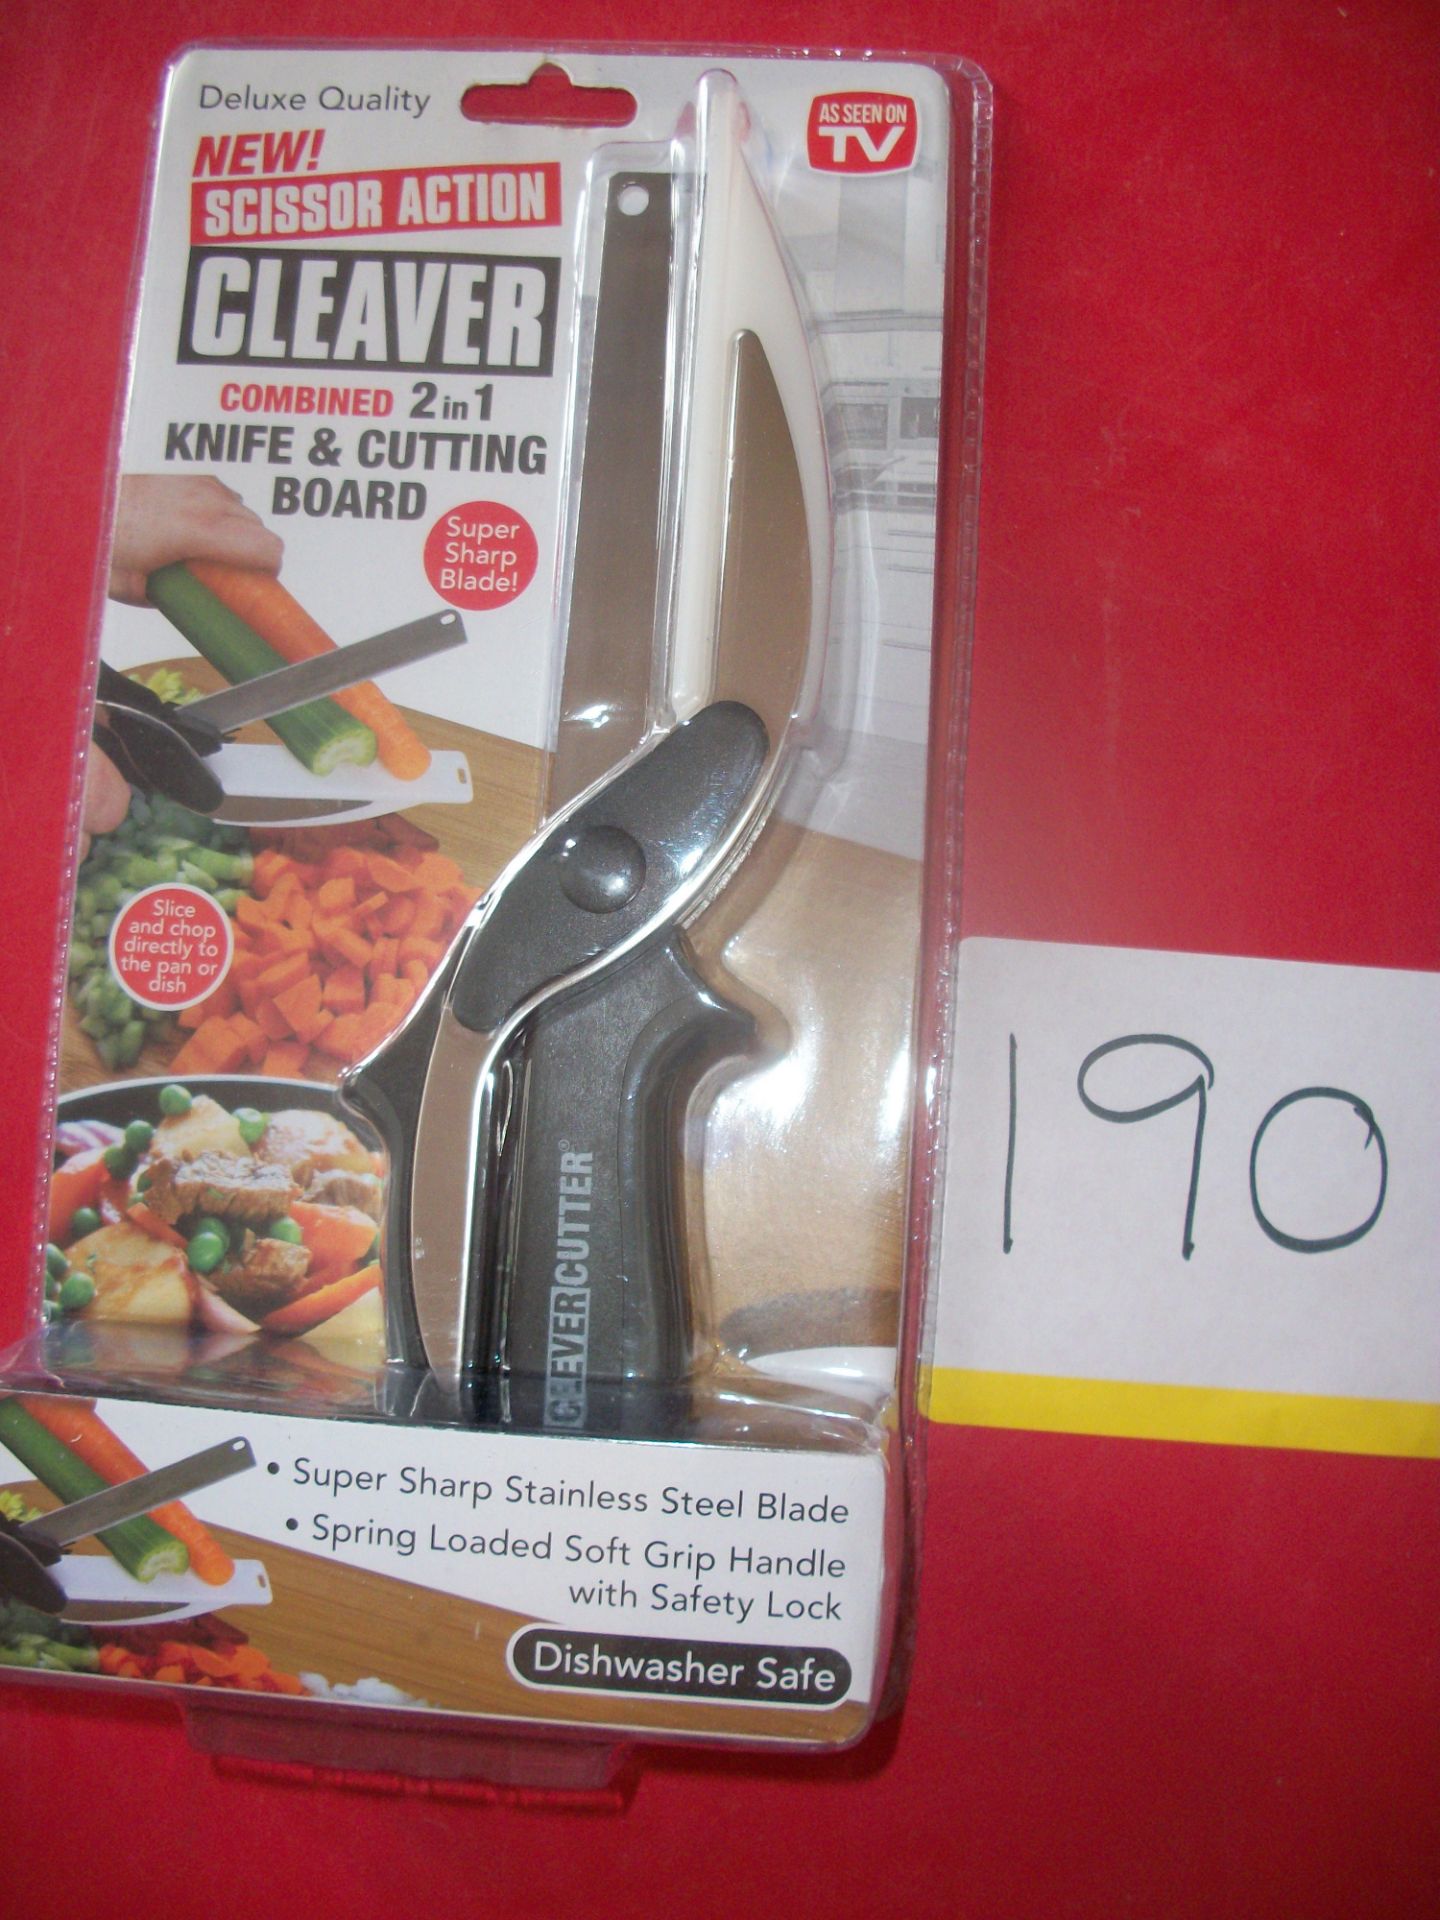 10 x Scissor Action Cleaver Combined 2in1 Knife & Cutting Board